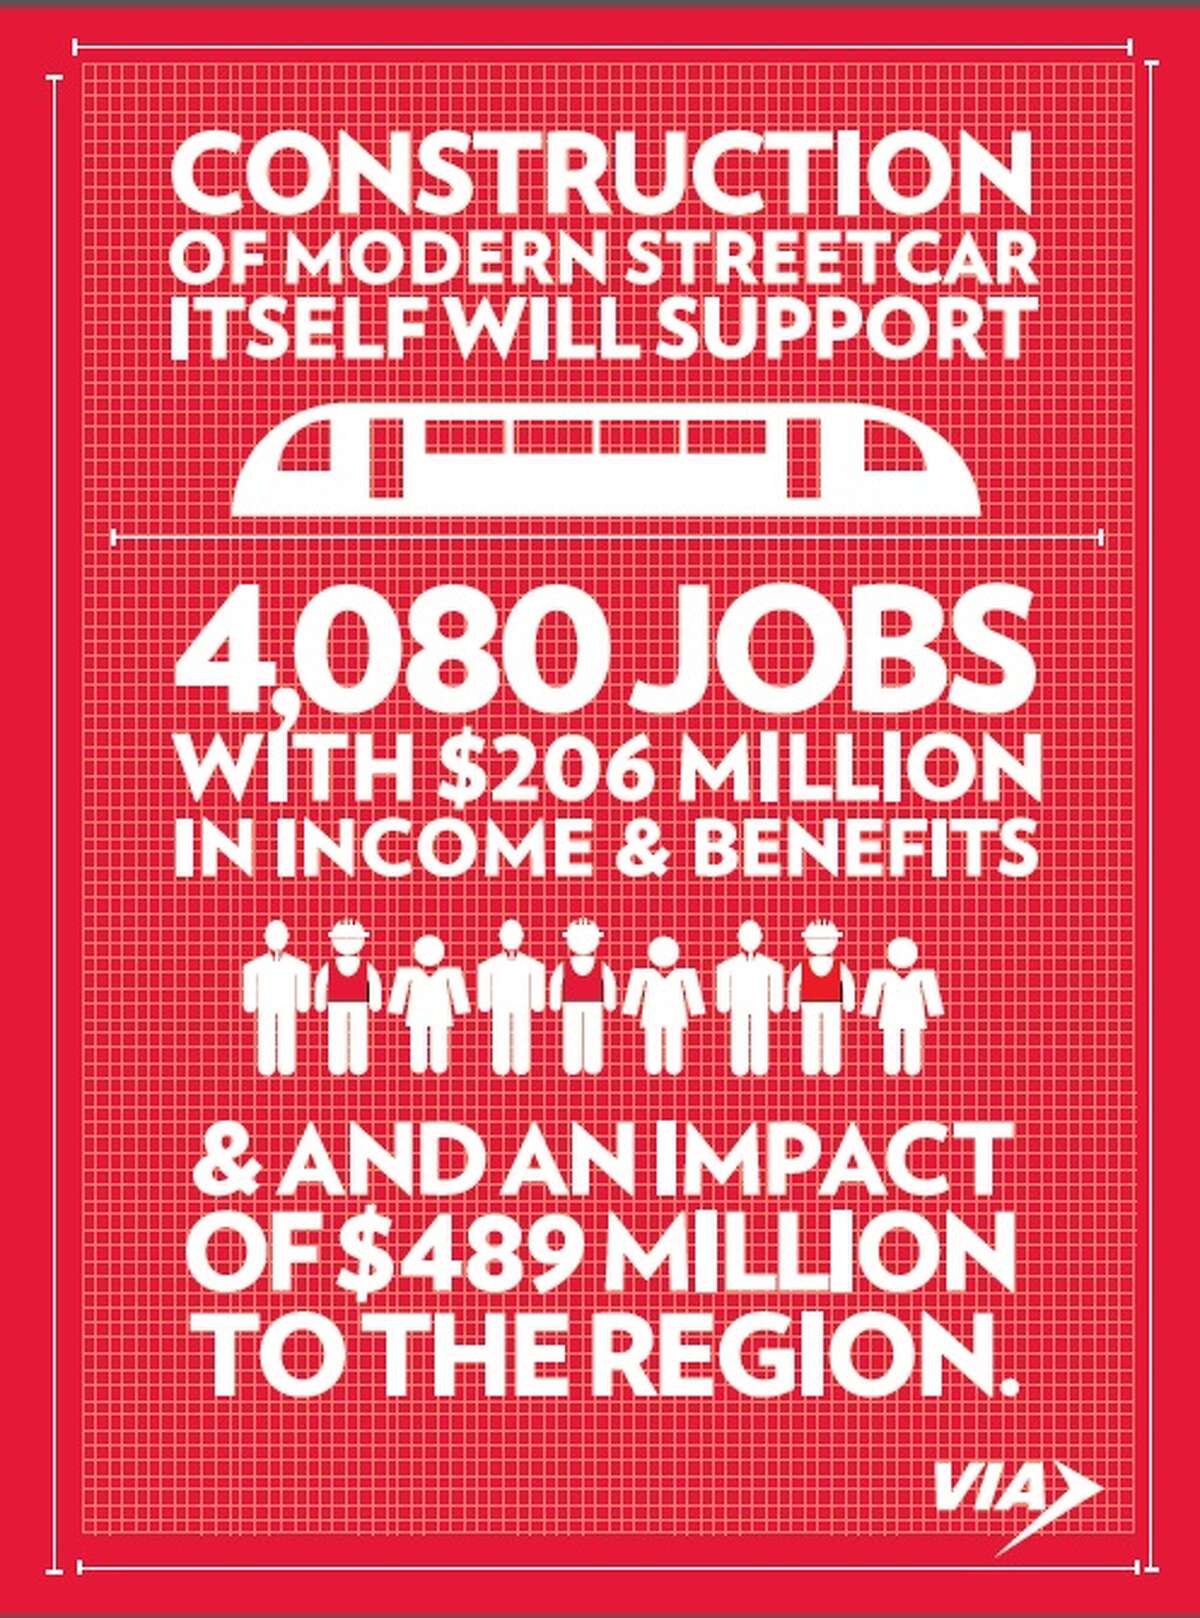 A graphic displayed at Monday morning’s VIA Streetcar economic impact report.